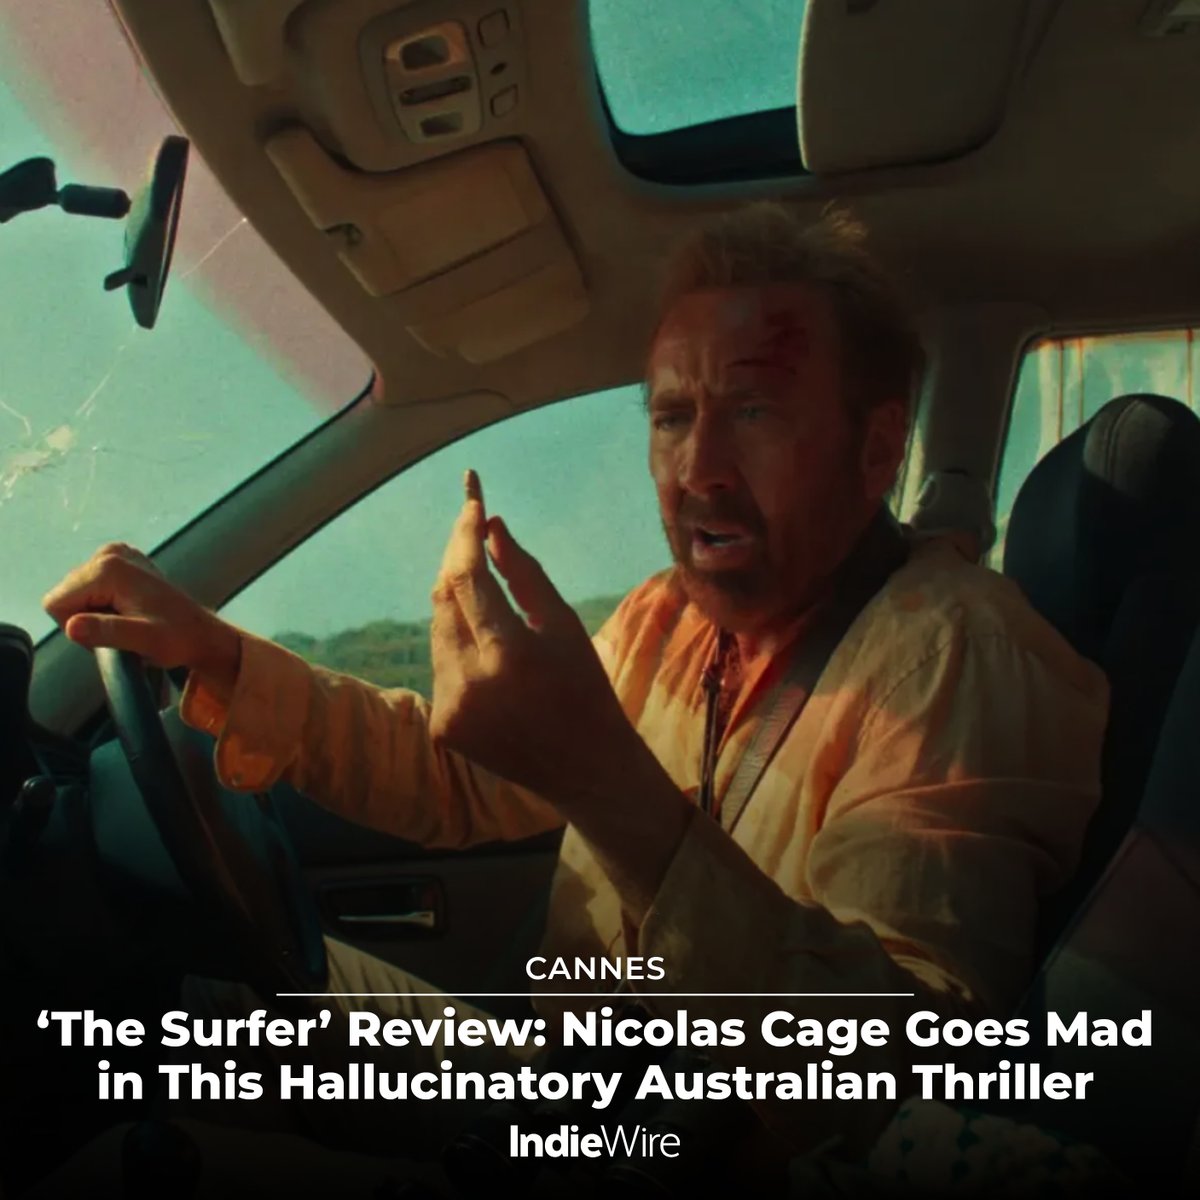 #Cannes: The latest outlet for Nicolas Cage to lose his mind on camera, “The Surfer” is drenched in nods to New Wave Australian cinema of the 1970s. Read our review: trib.al/EEykmS0